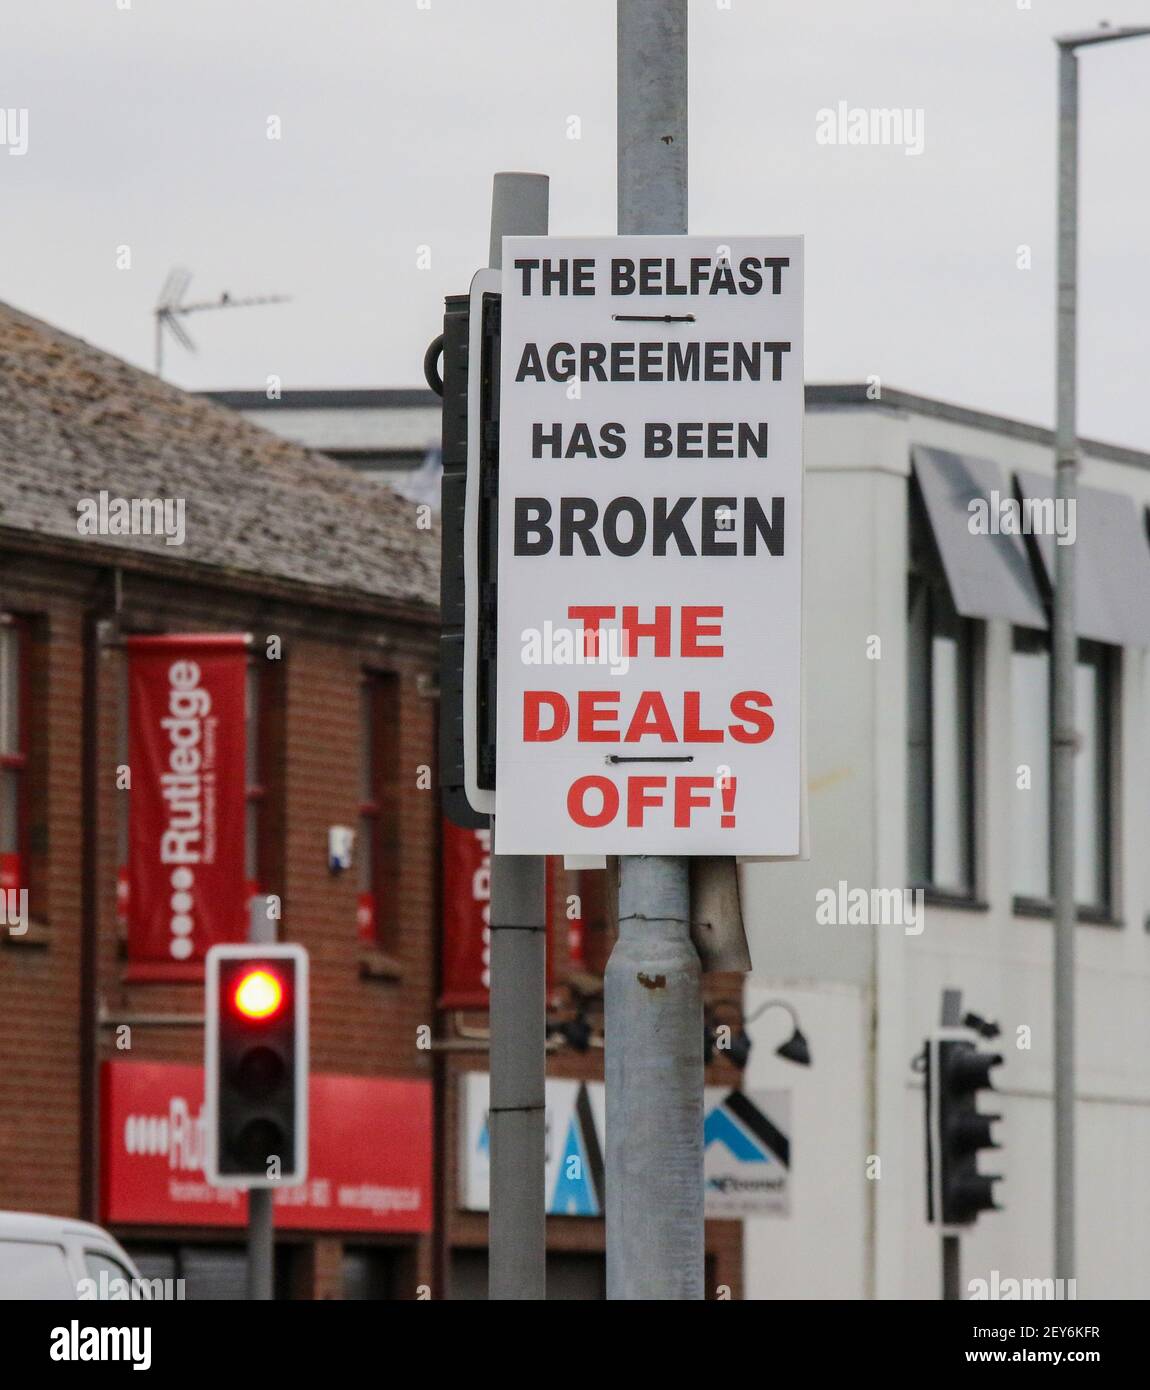 Unionist Loyalist opposition message to Northern Ireland protocol post-Brexit on loyalist placard in Northern Ireland March 2021. Stock Photo